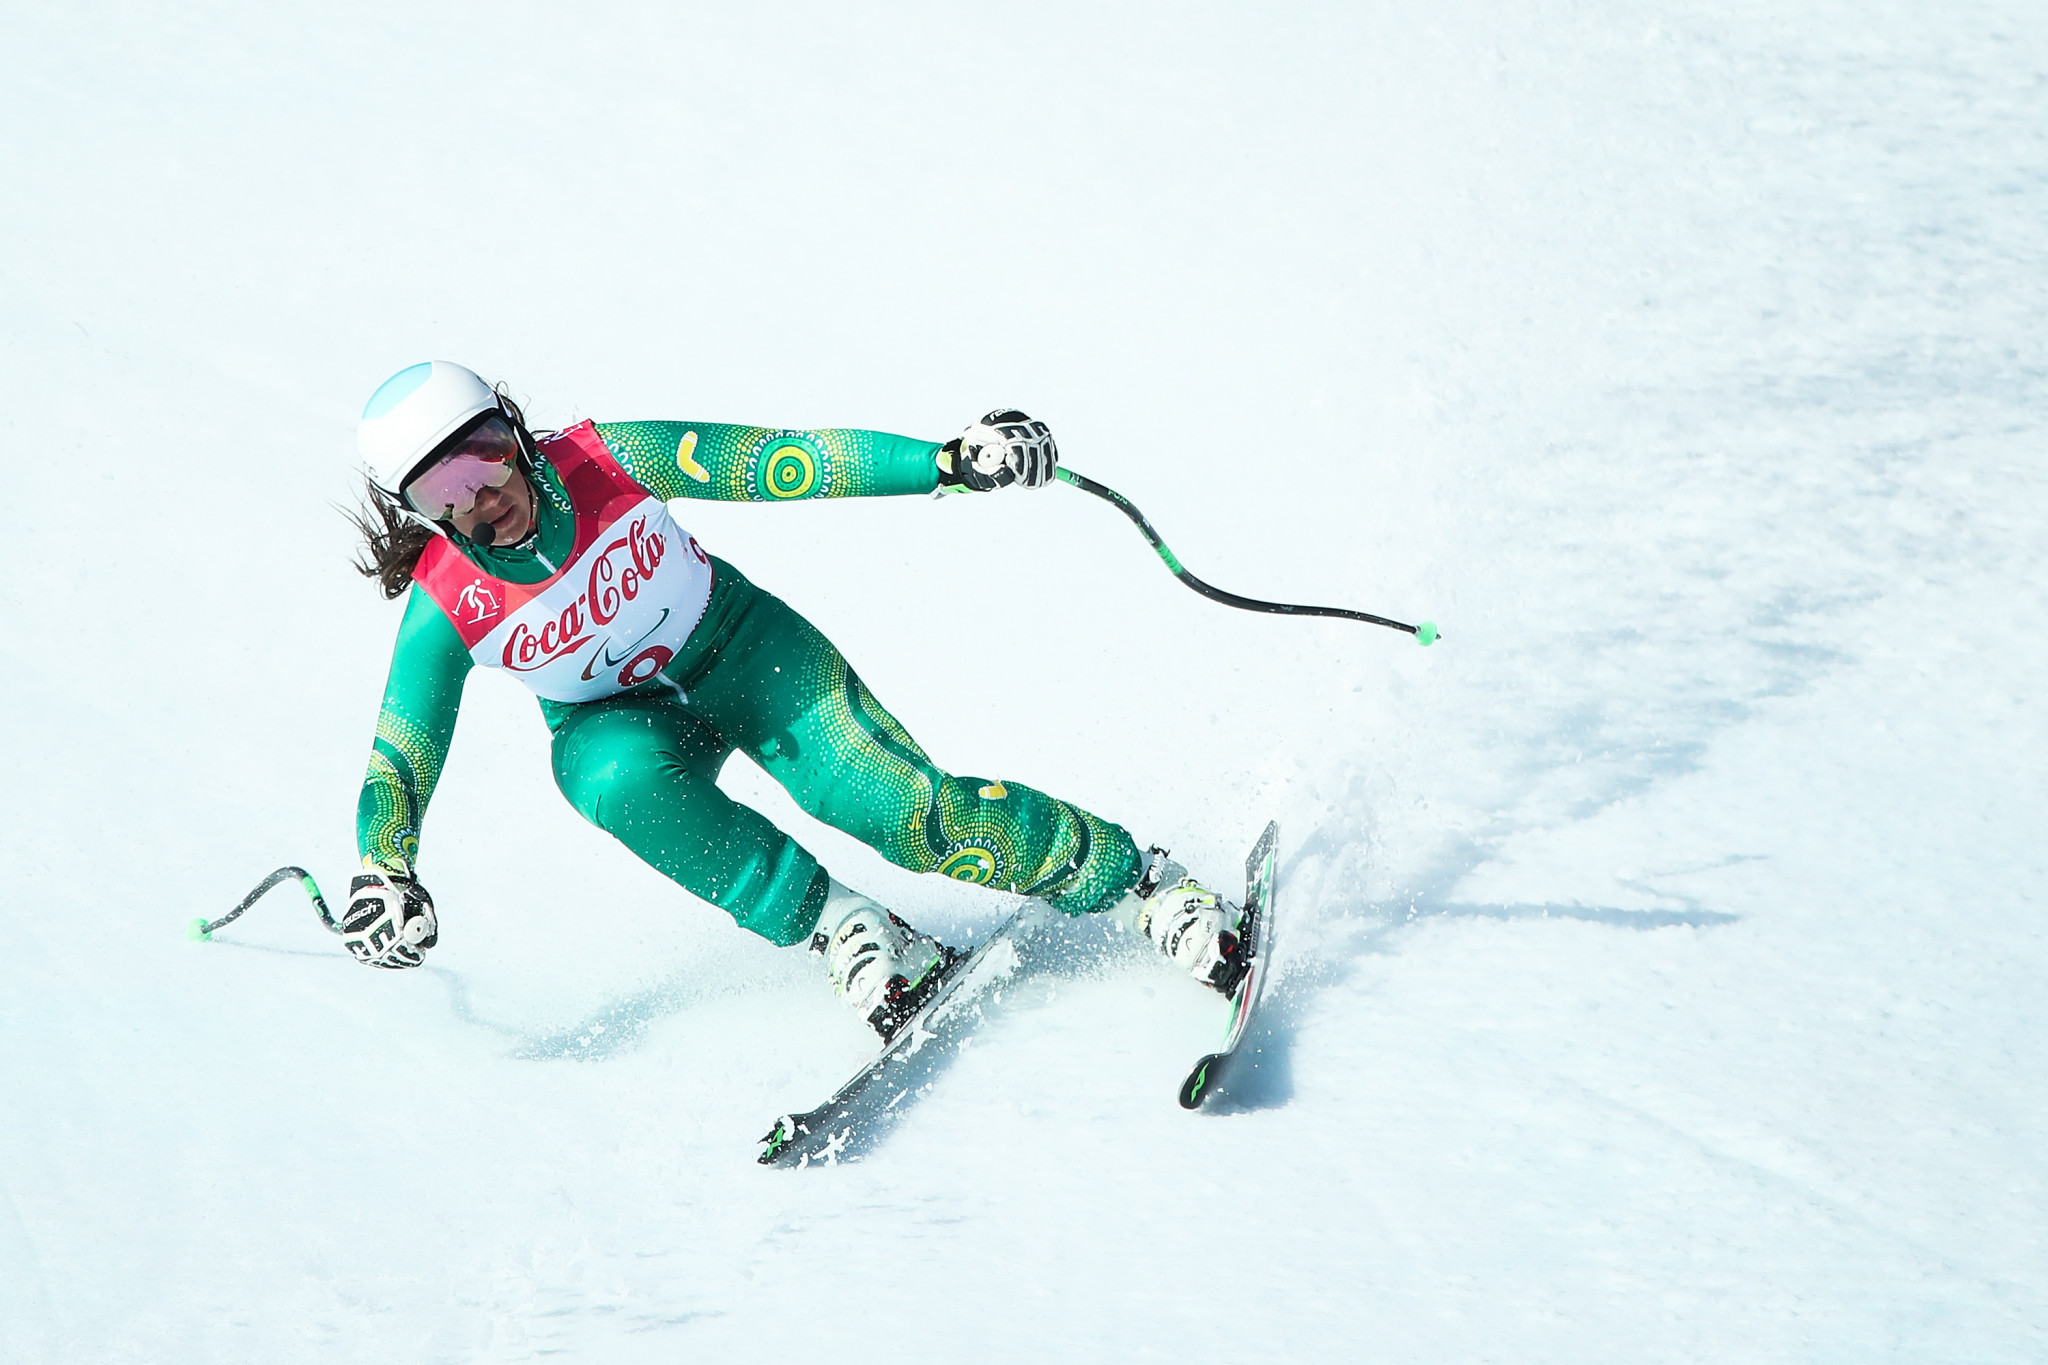 Perrine and Tudhope named Australian co-captains for Beijing 2022 Winter Paralympics